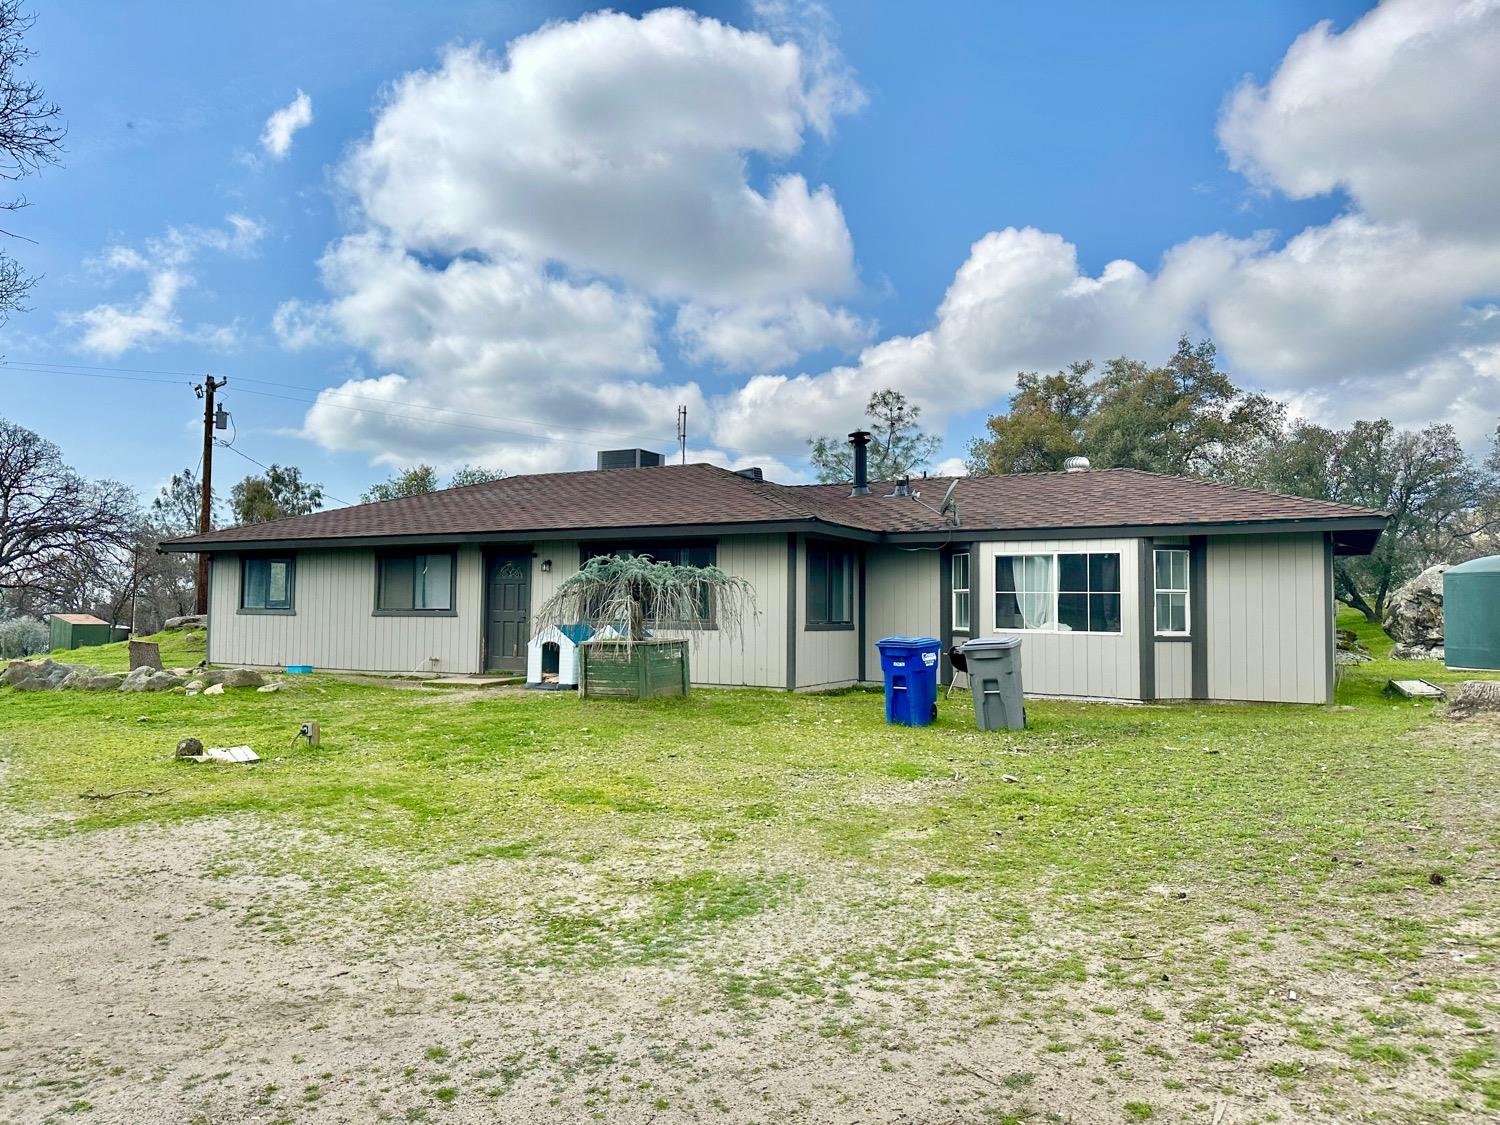 Photo of 31331 Auberry Rd in Auberry, CA